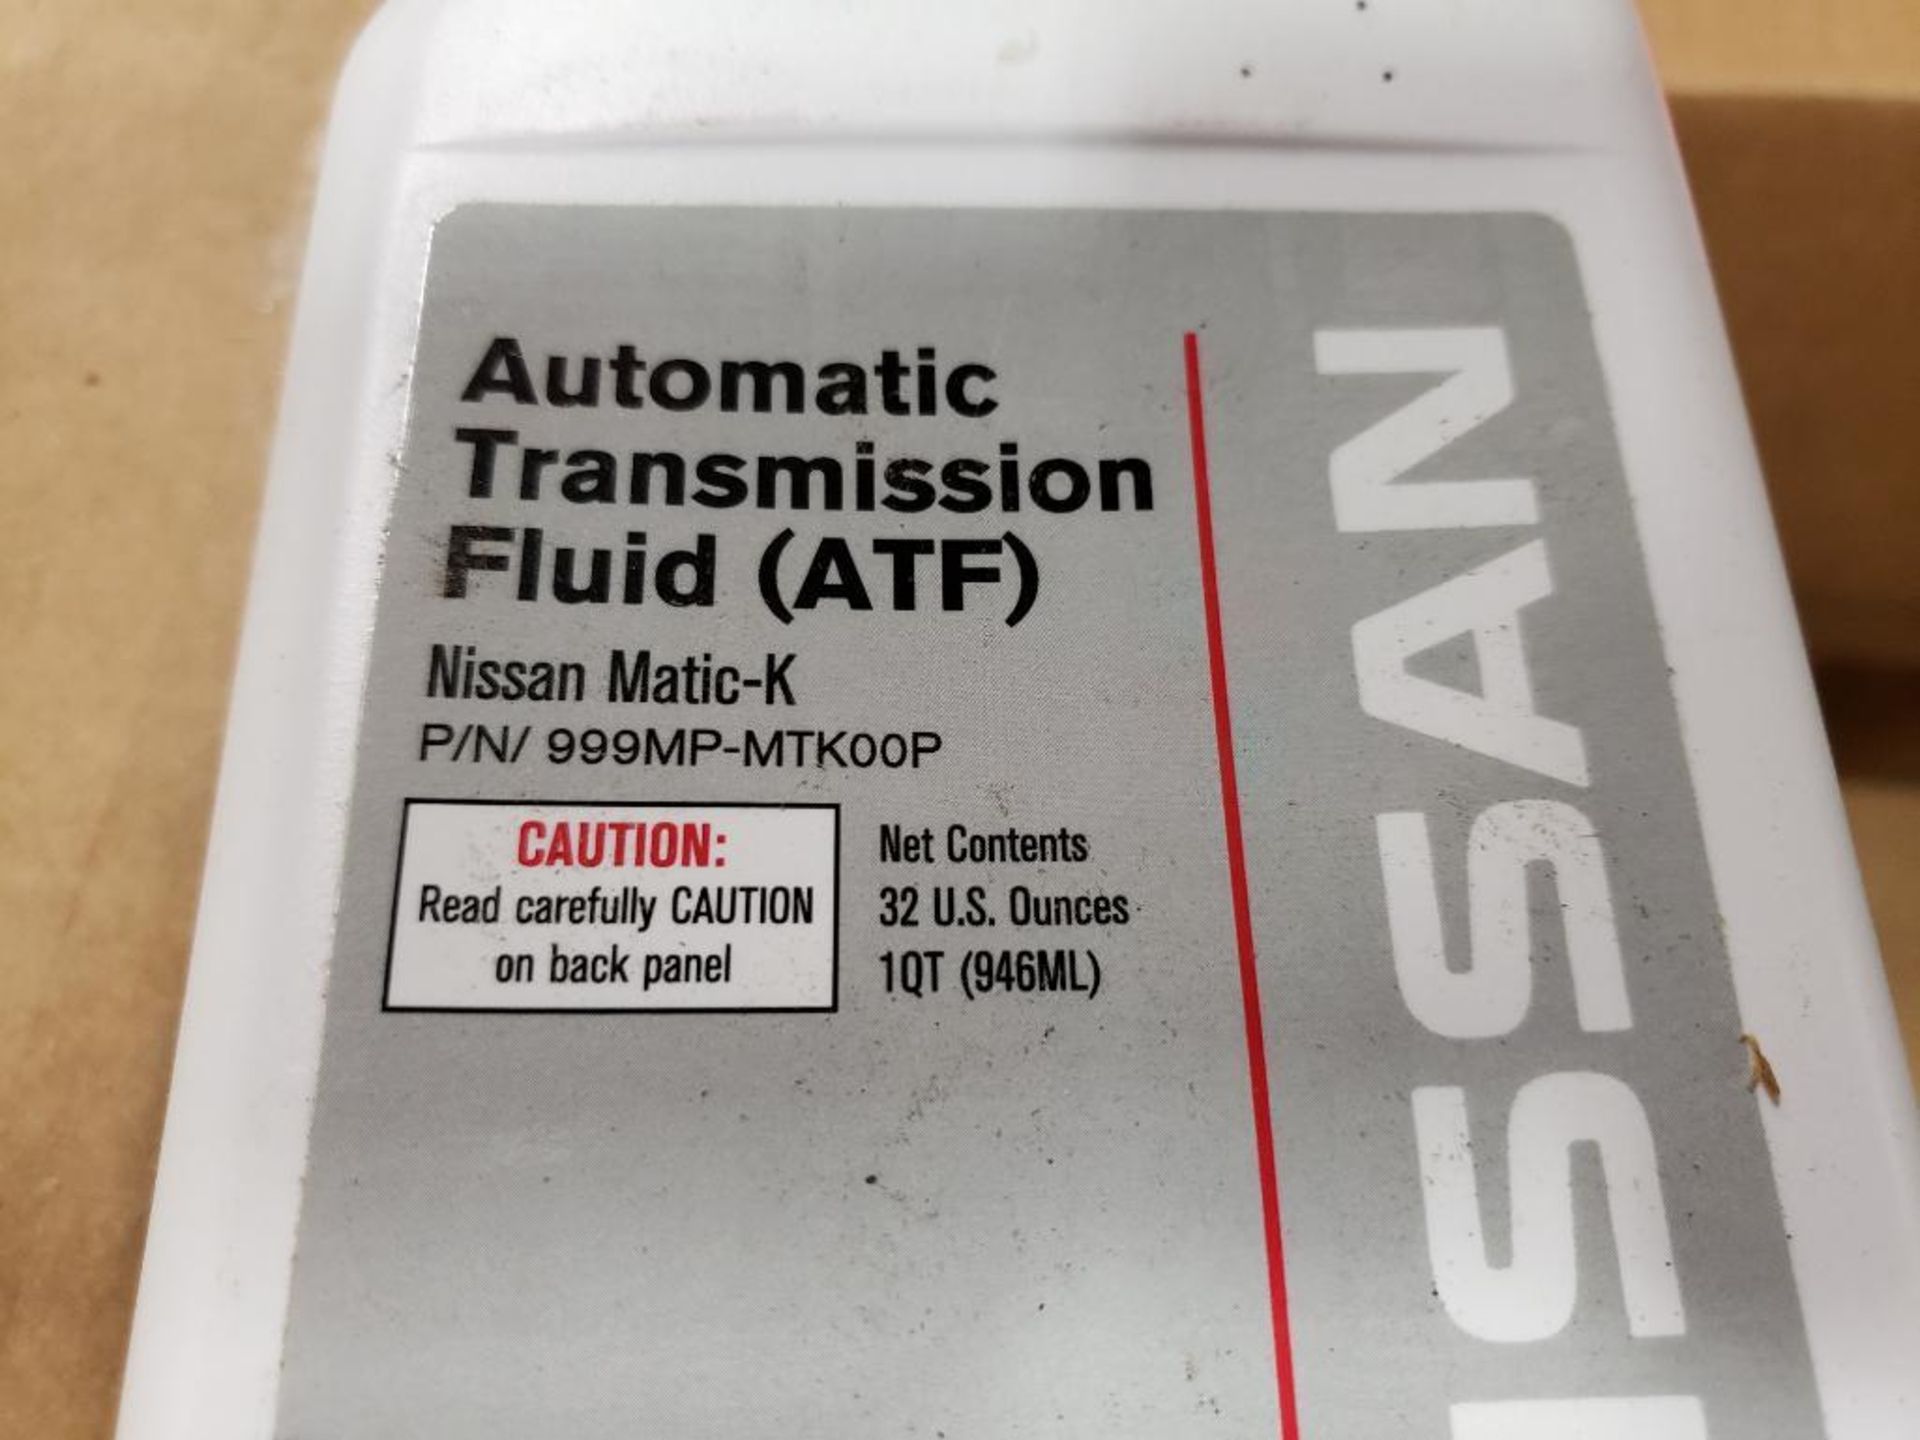 Qty 36 - Nissan Automatic transmission fluid (ATF) 999MP-MTK00P. (3 Boxes of 12 Bottles each). - Image 4 of 4